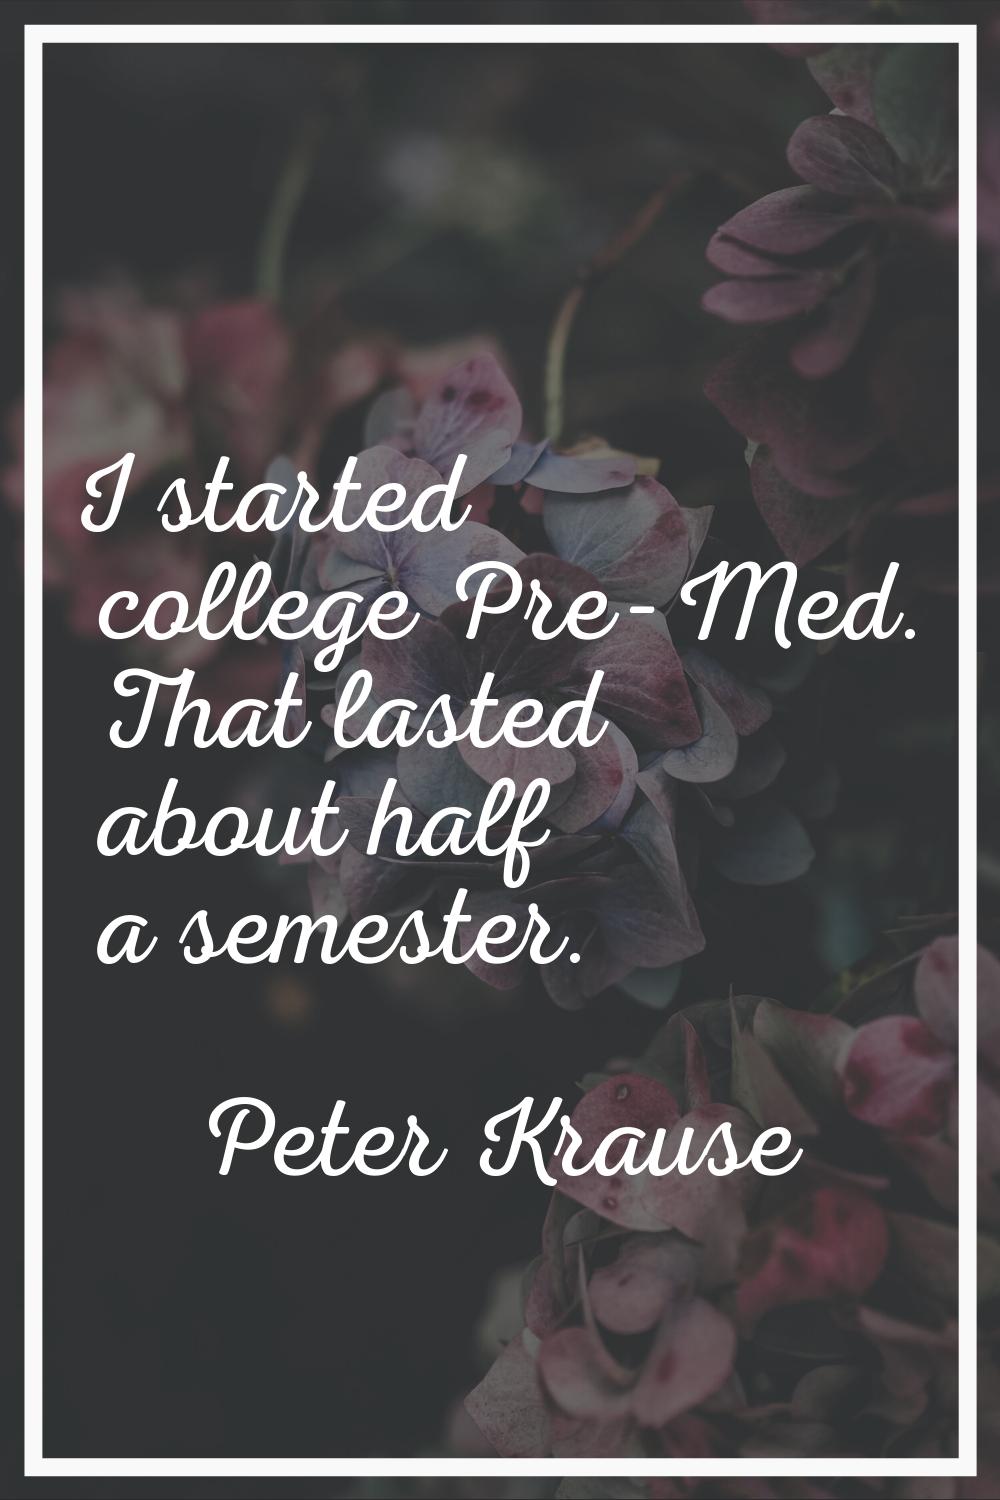 I started college Pre-Med. That lasted about half a semester.